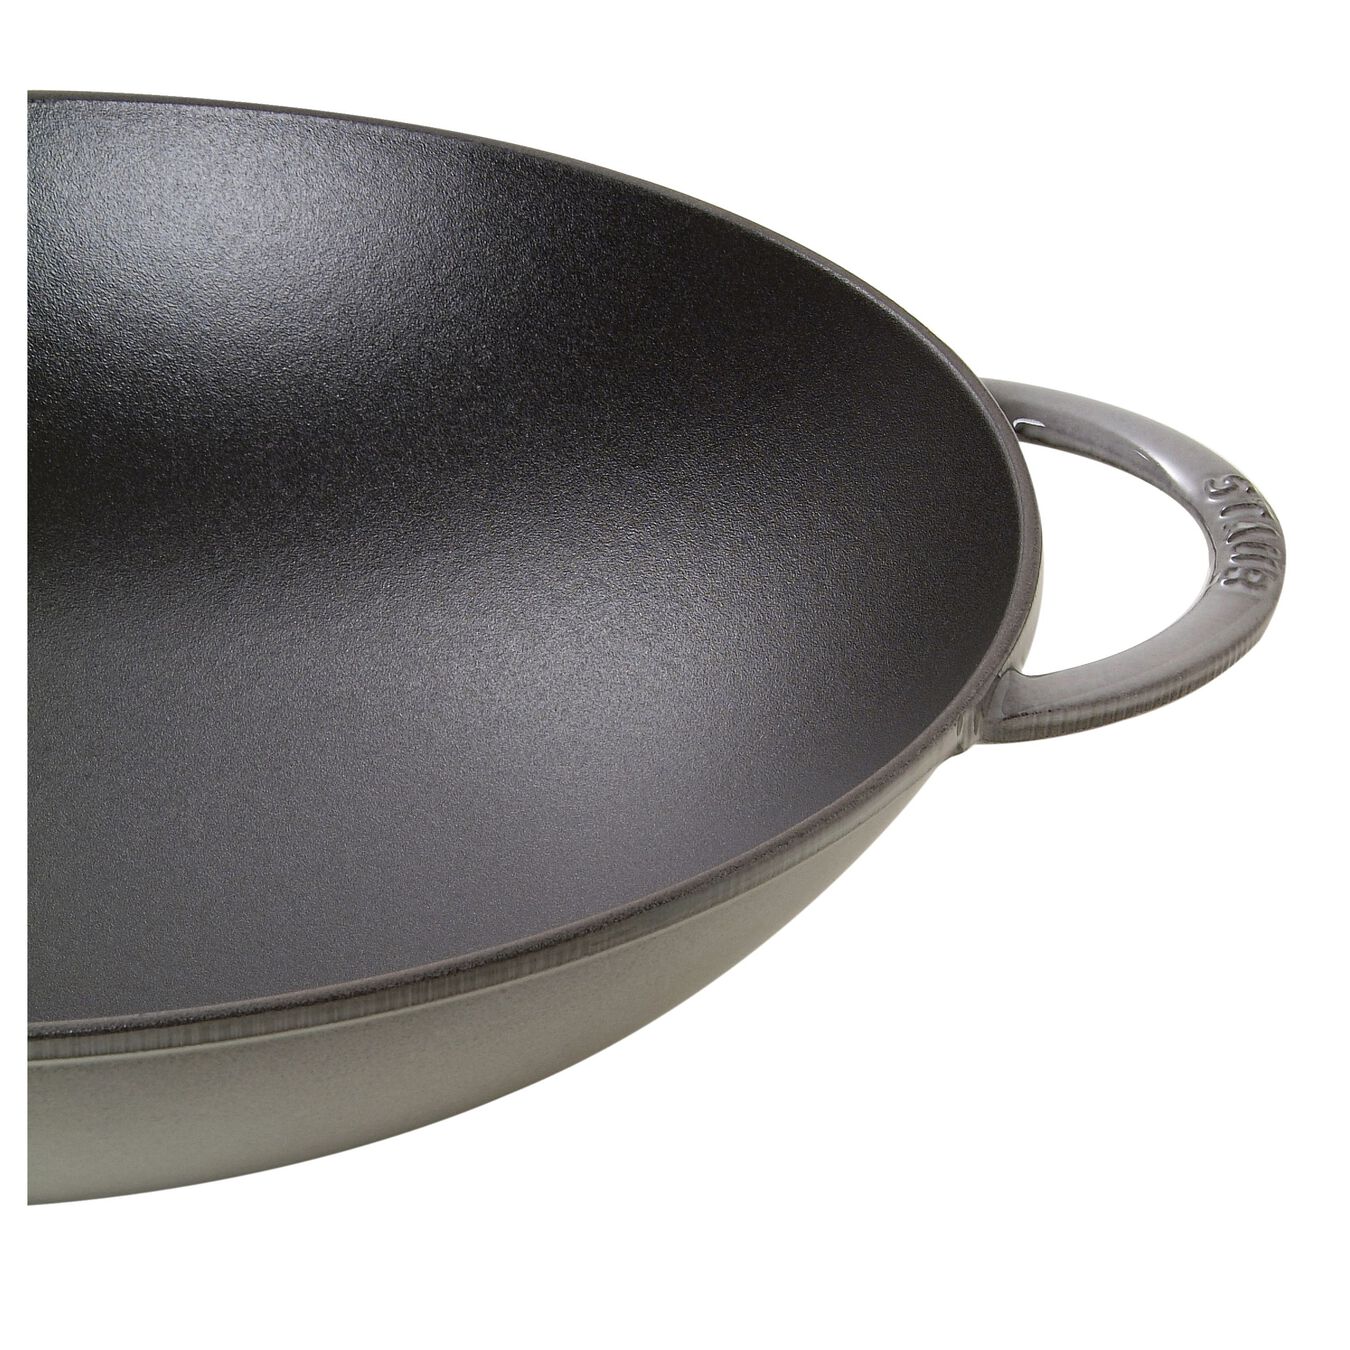 37 cm / 14.5 inch cast iron Wok with glass lid, graphite-grey,,large 2